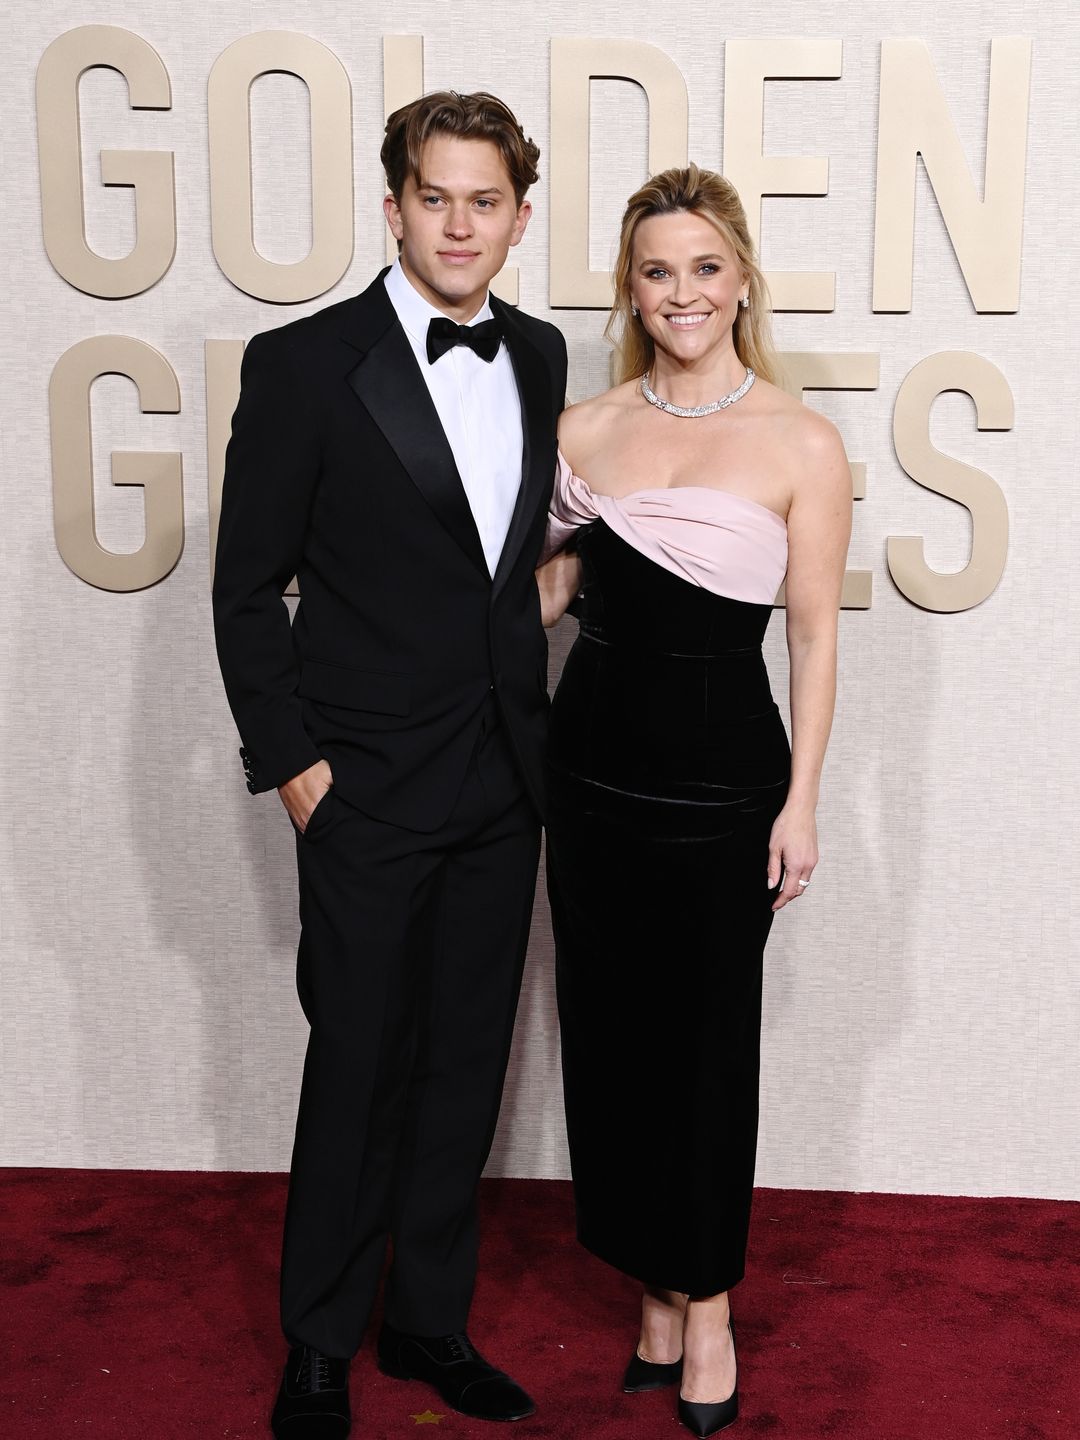 Deacon Phillippe and Reese Witherspoon on the red carpet